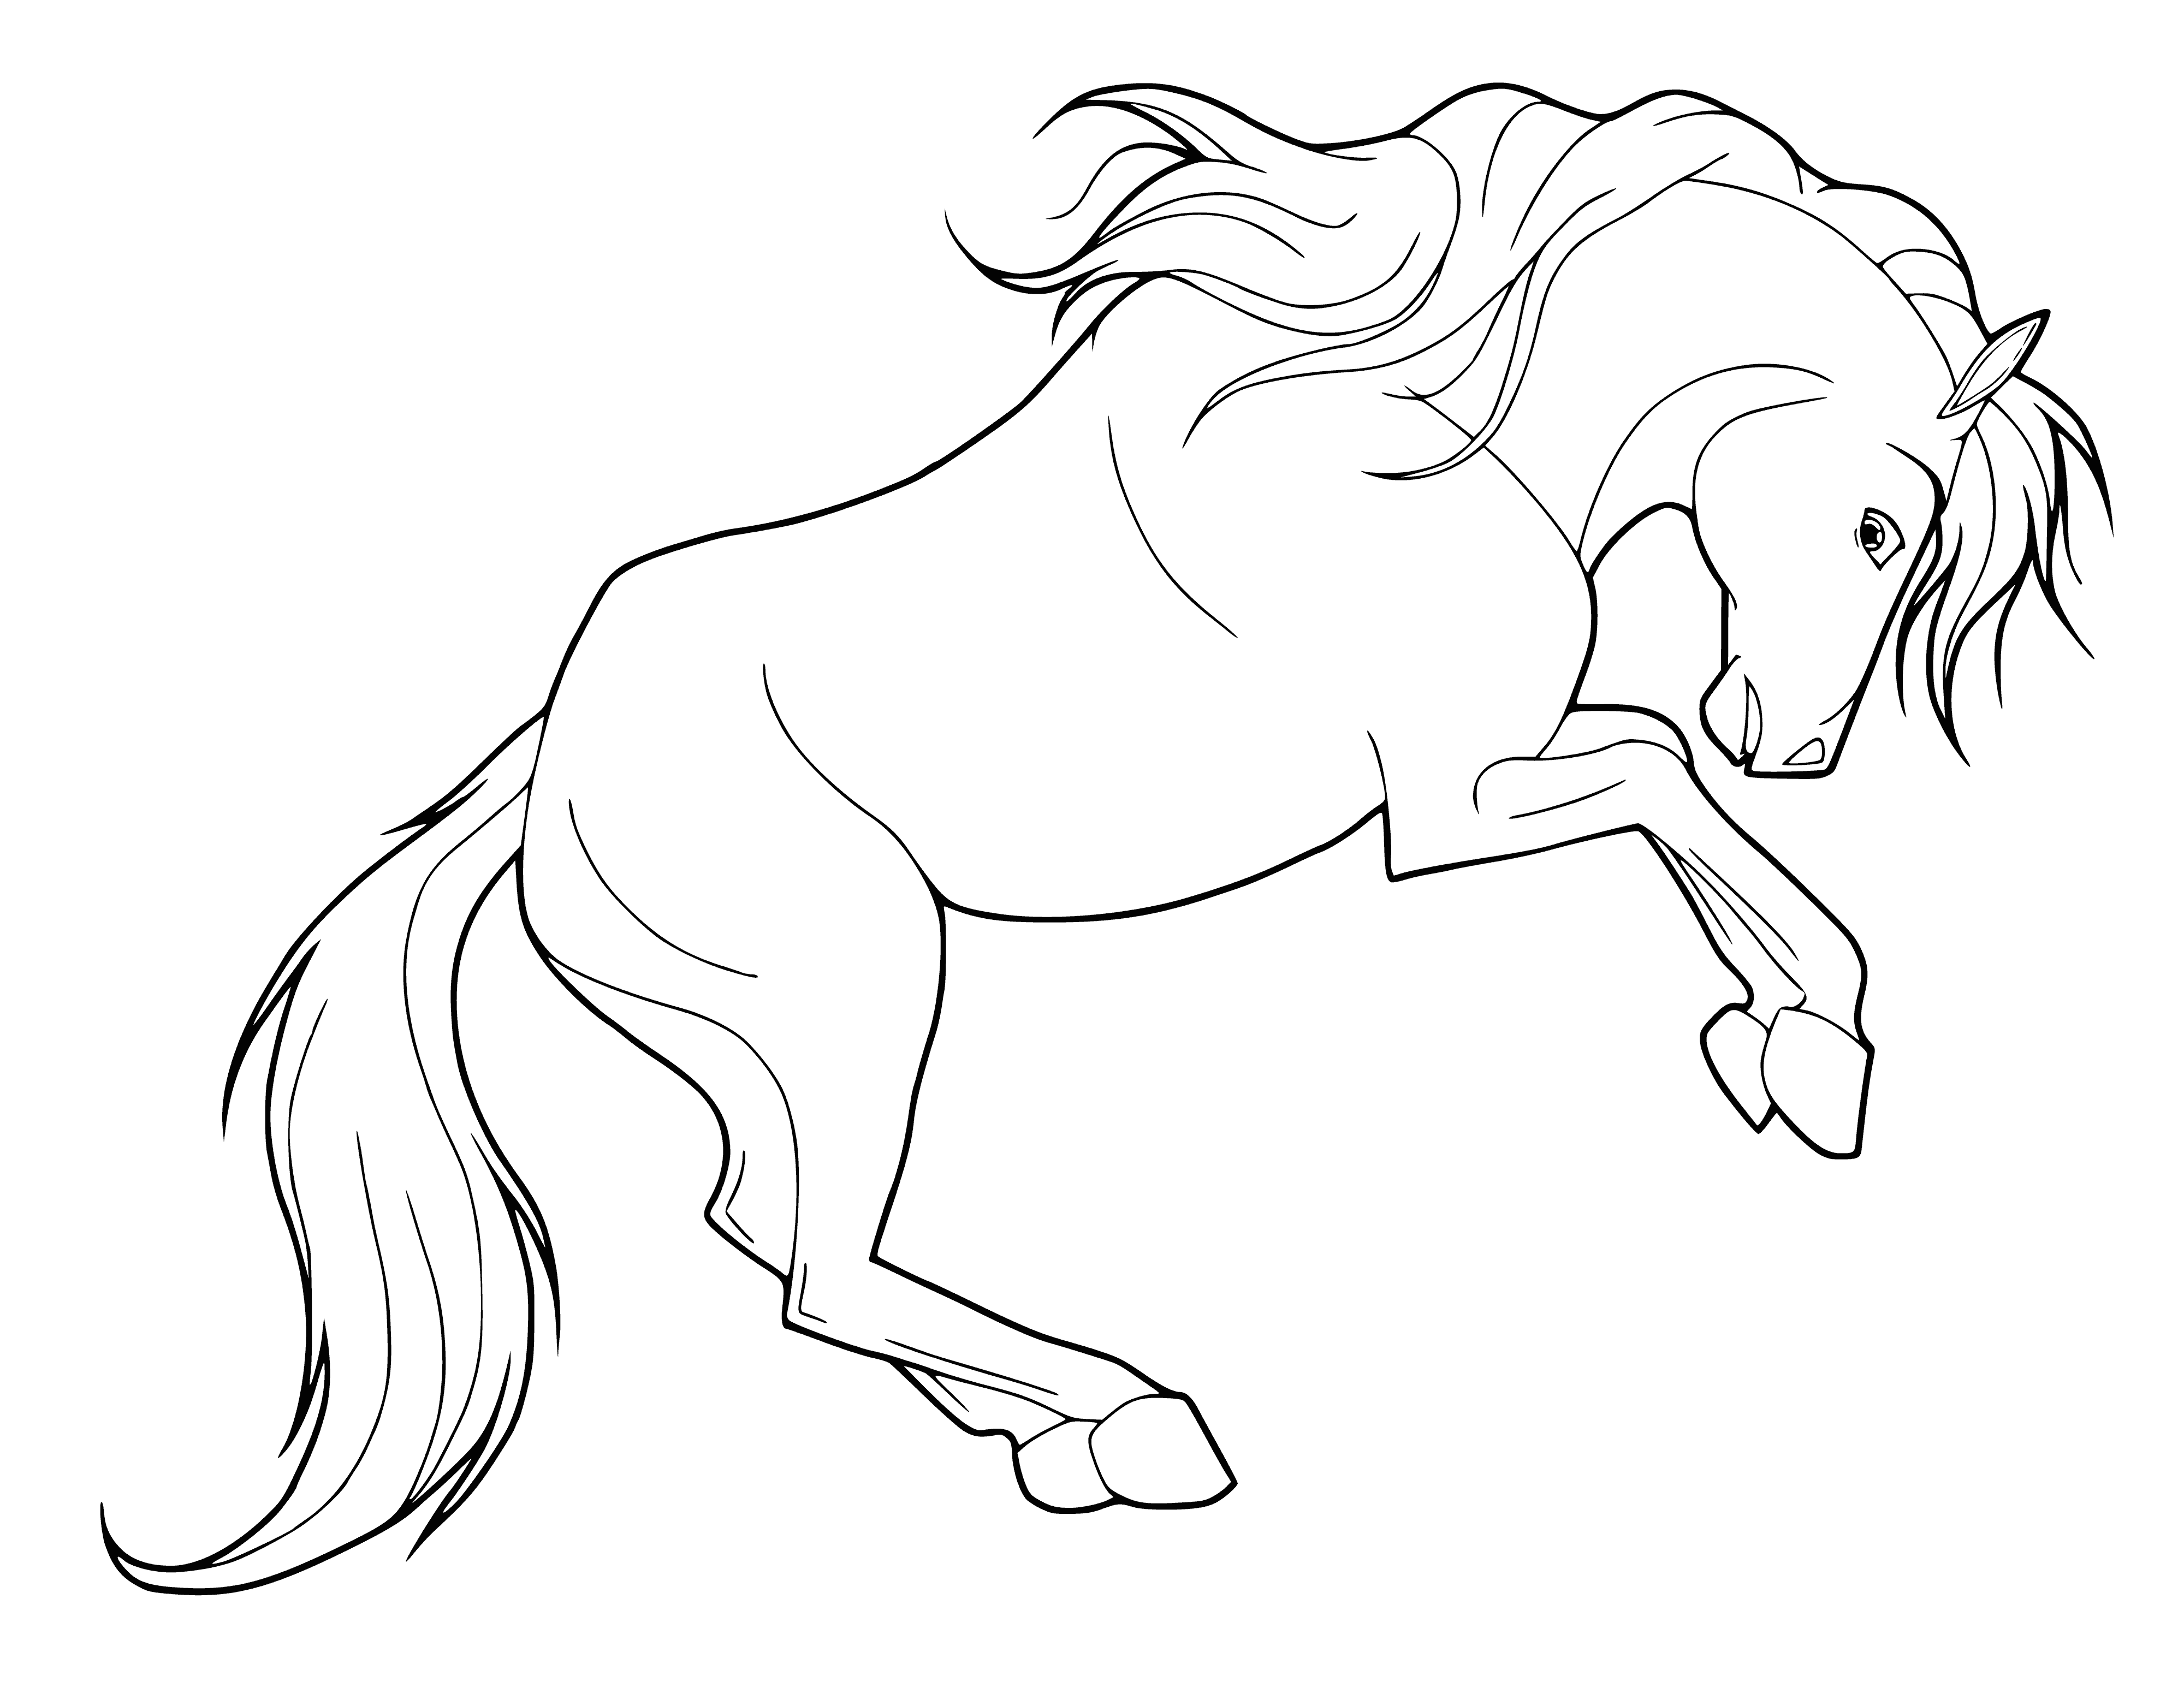 coloring page: Happy brown & white horse galloping energetically through a field, with a long mane & tail, head held high & ears perked up. Looks excited!